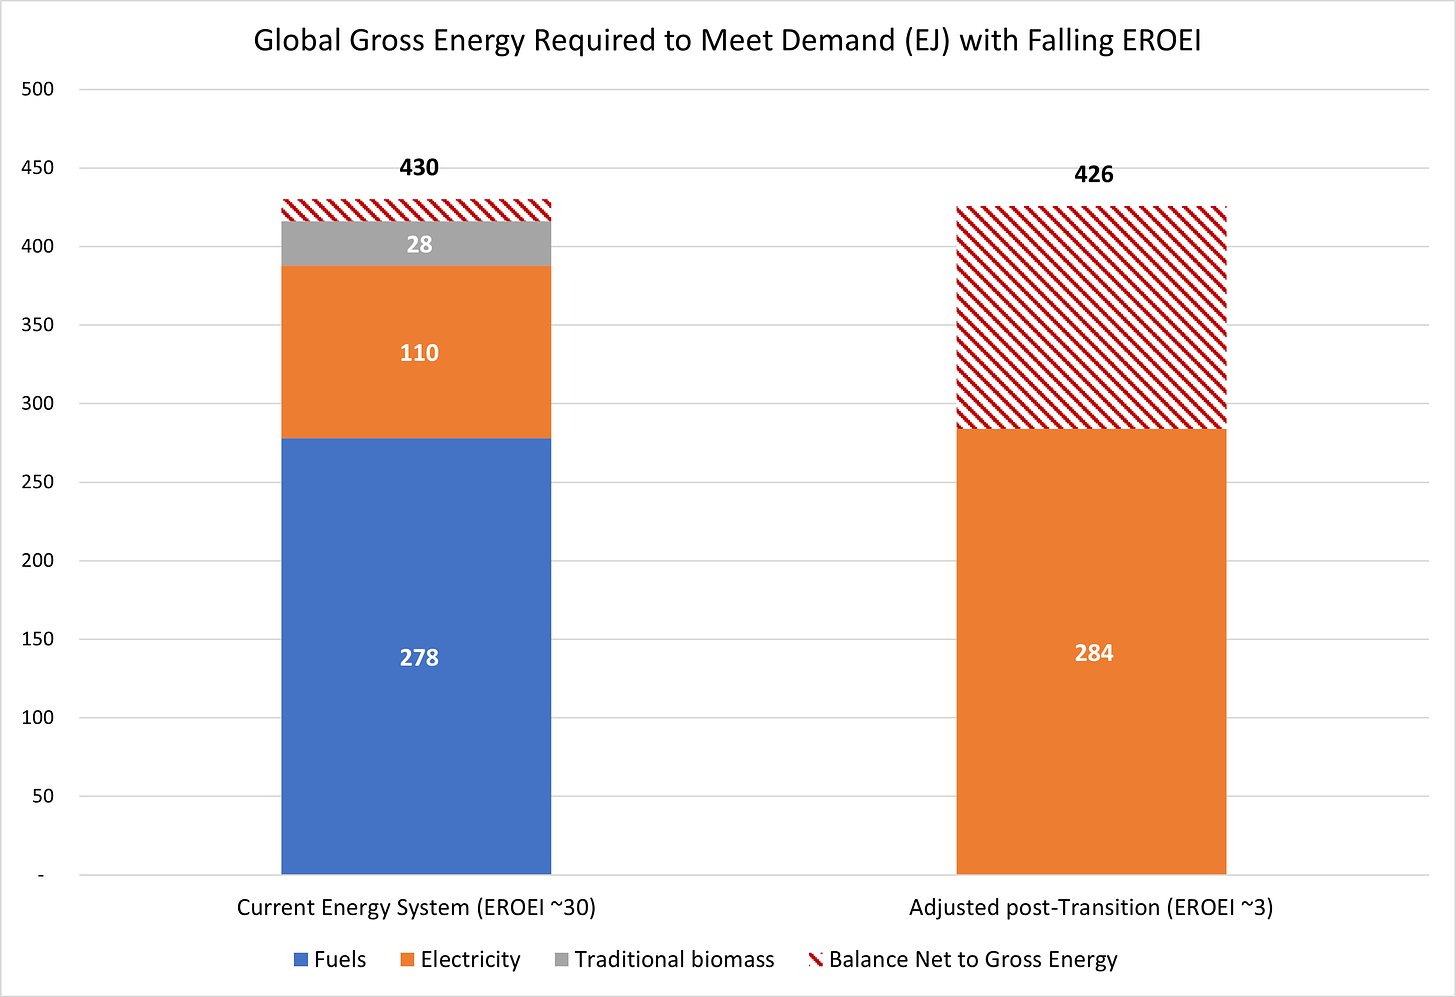 Figure 5 - Global Gross Energy Required to Meet Demand (EJ) with Falling EROEI